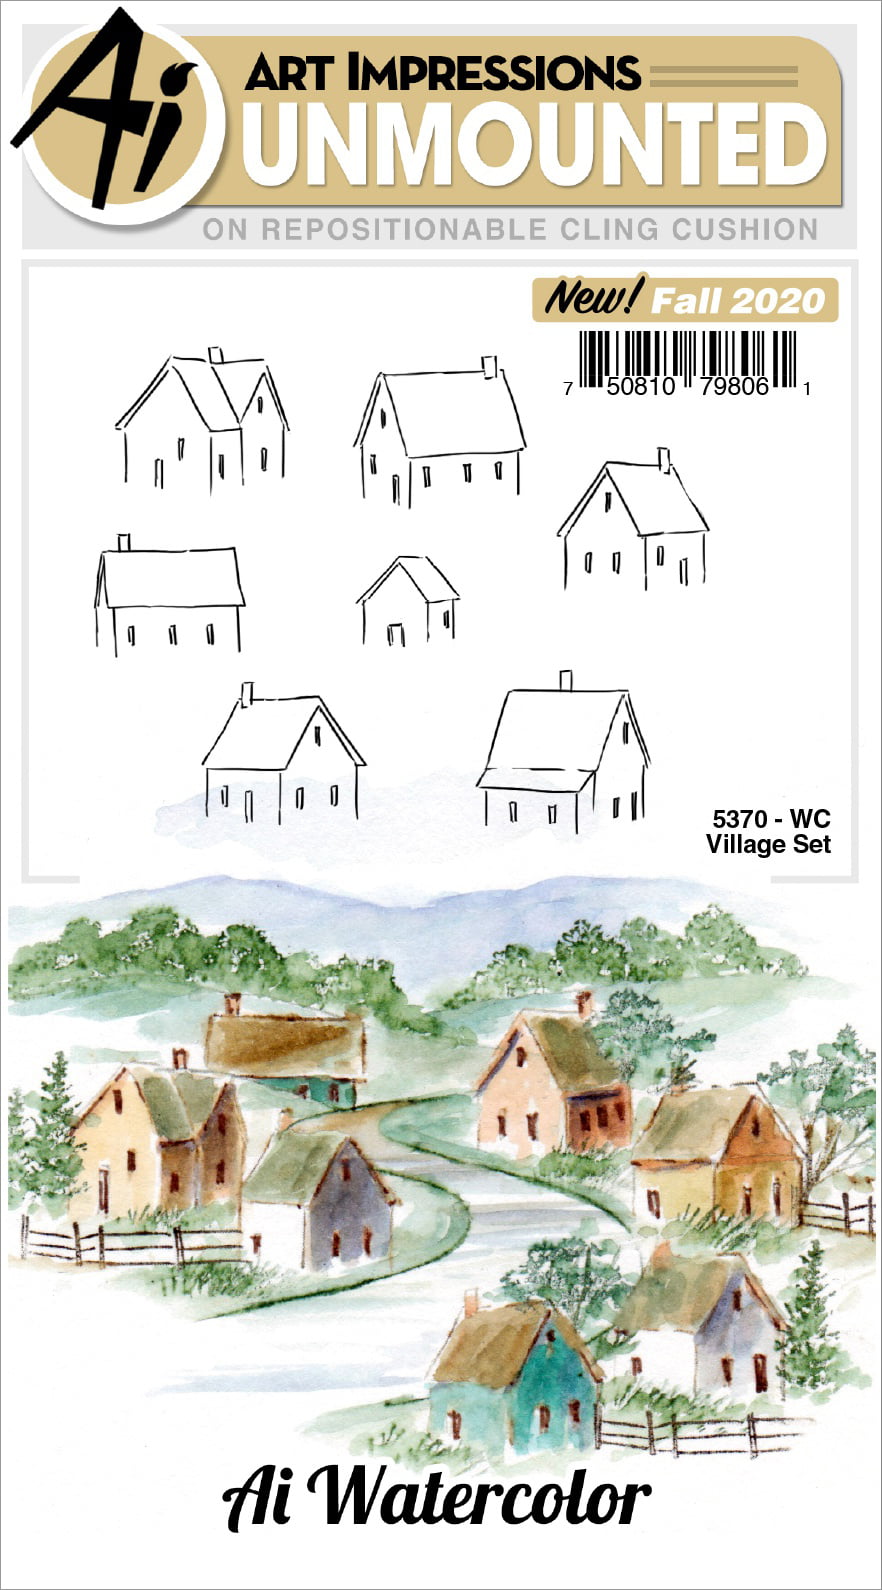 rustic Cabins Art Impressions Watercolor Cling Rubber Stamps